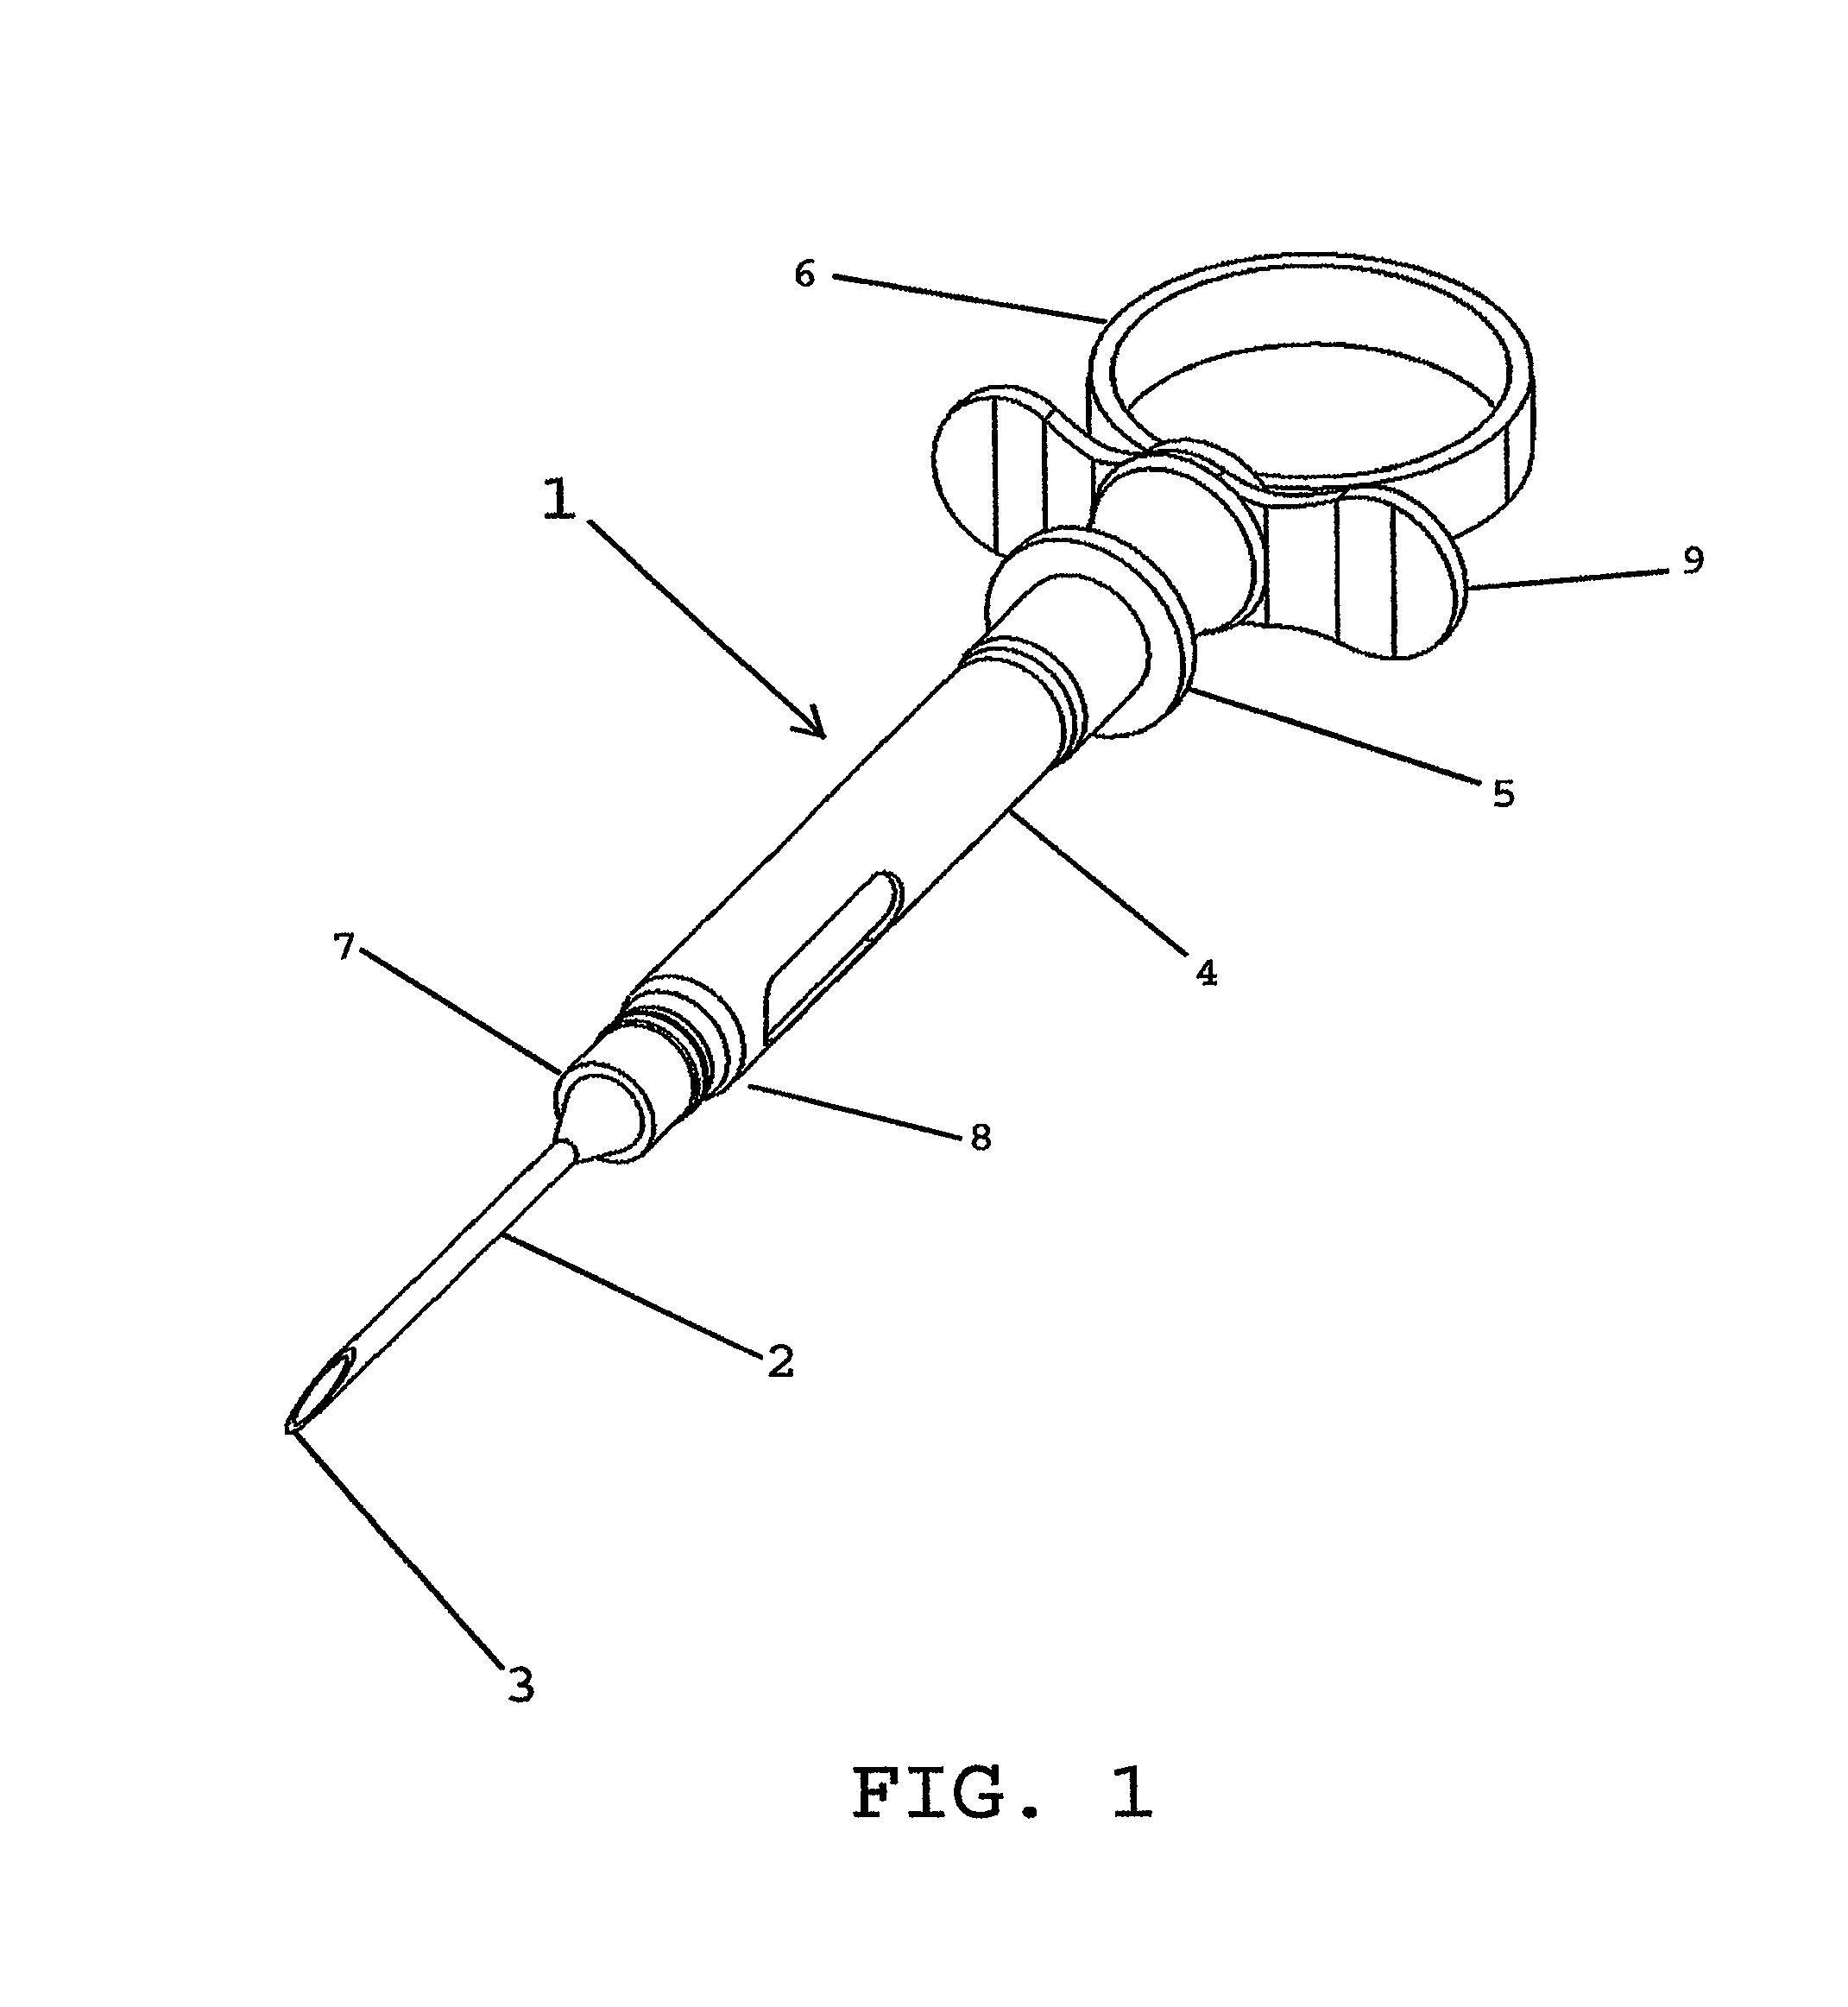 Temporary instrument holder, sharps protector, passing aid and safety transport apparatus